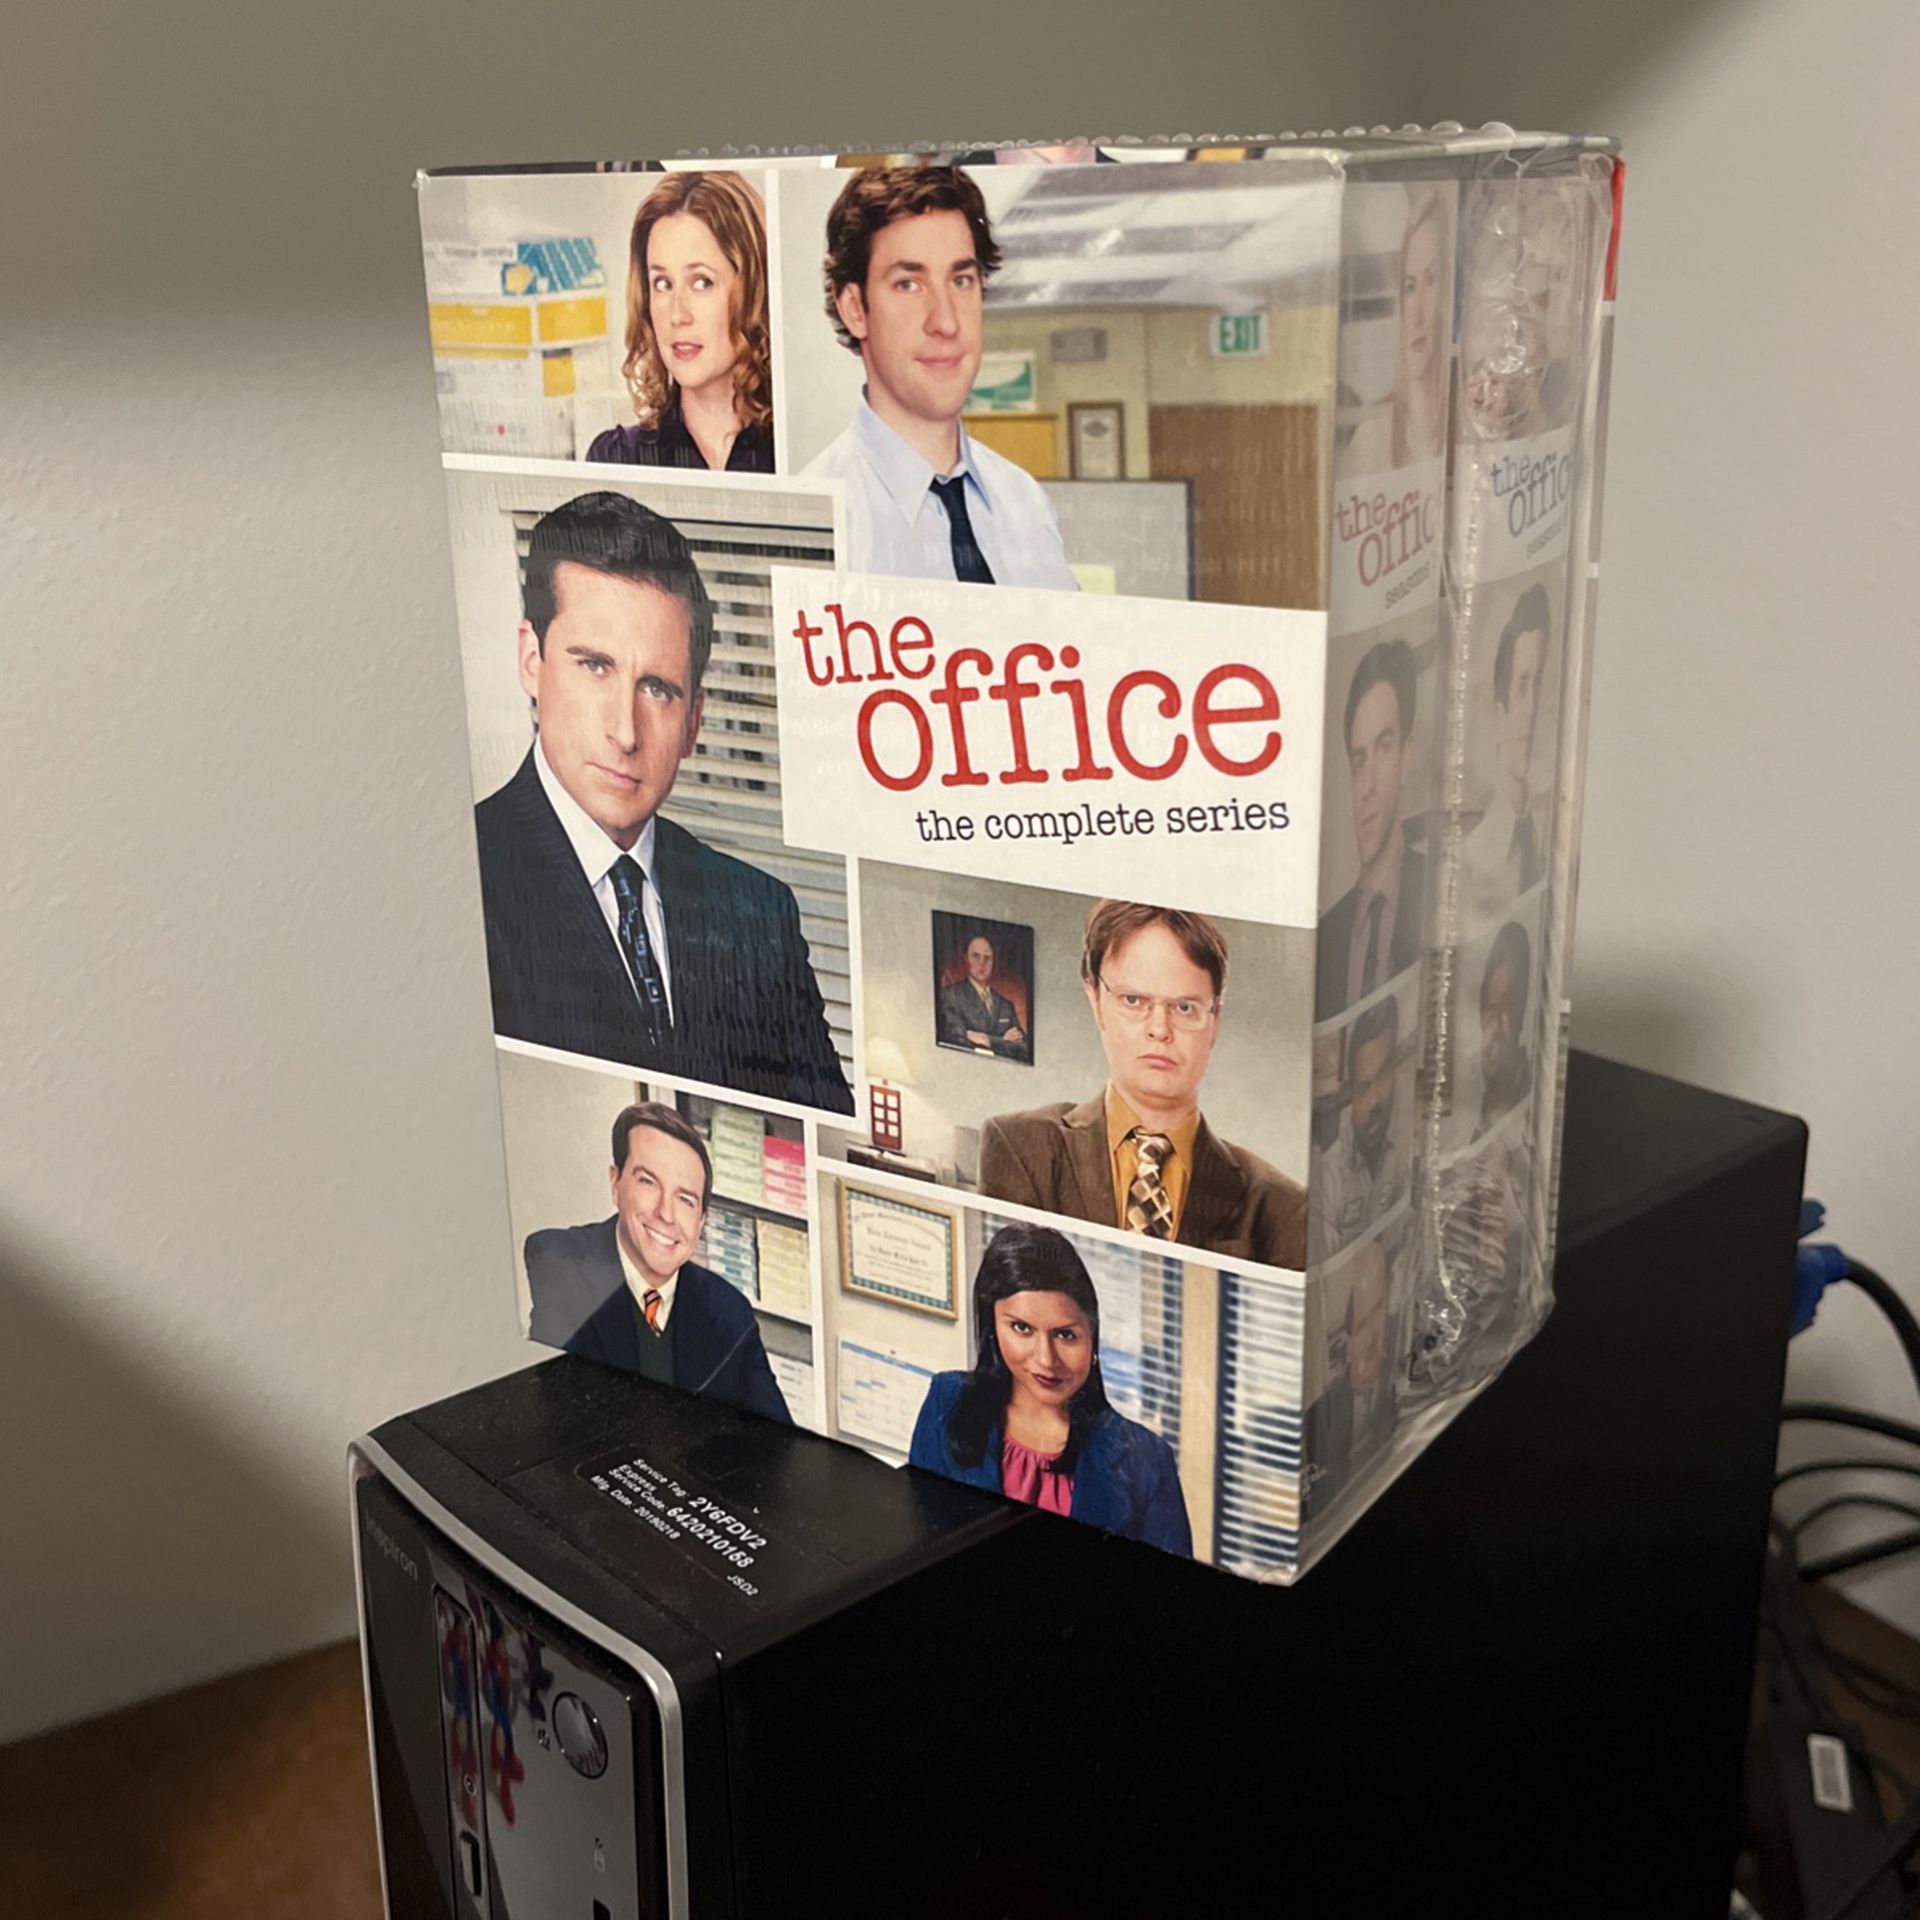 The Office Series On DVD